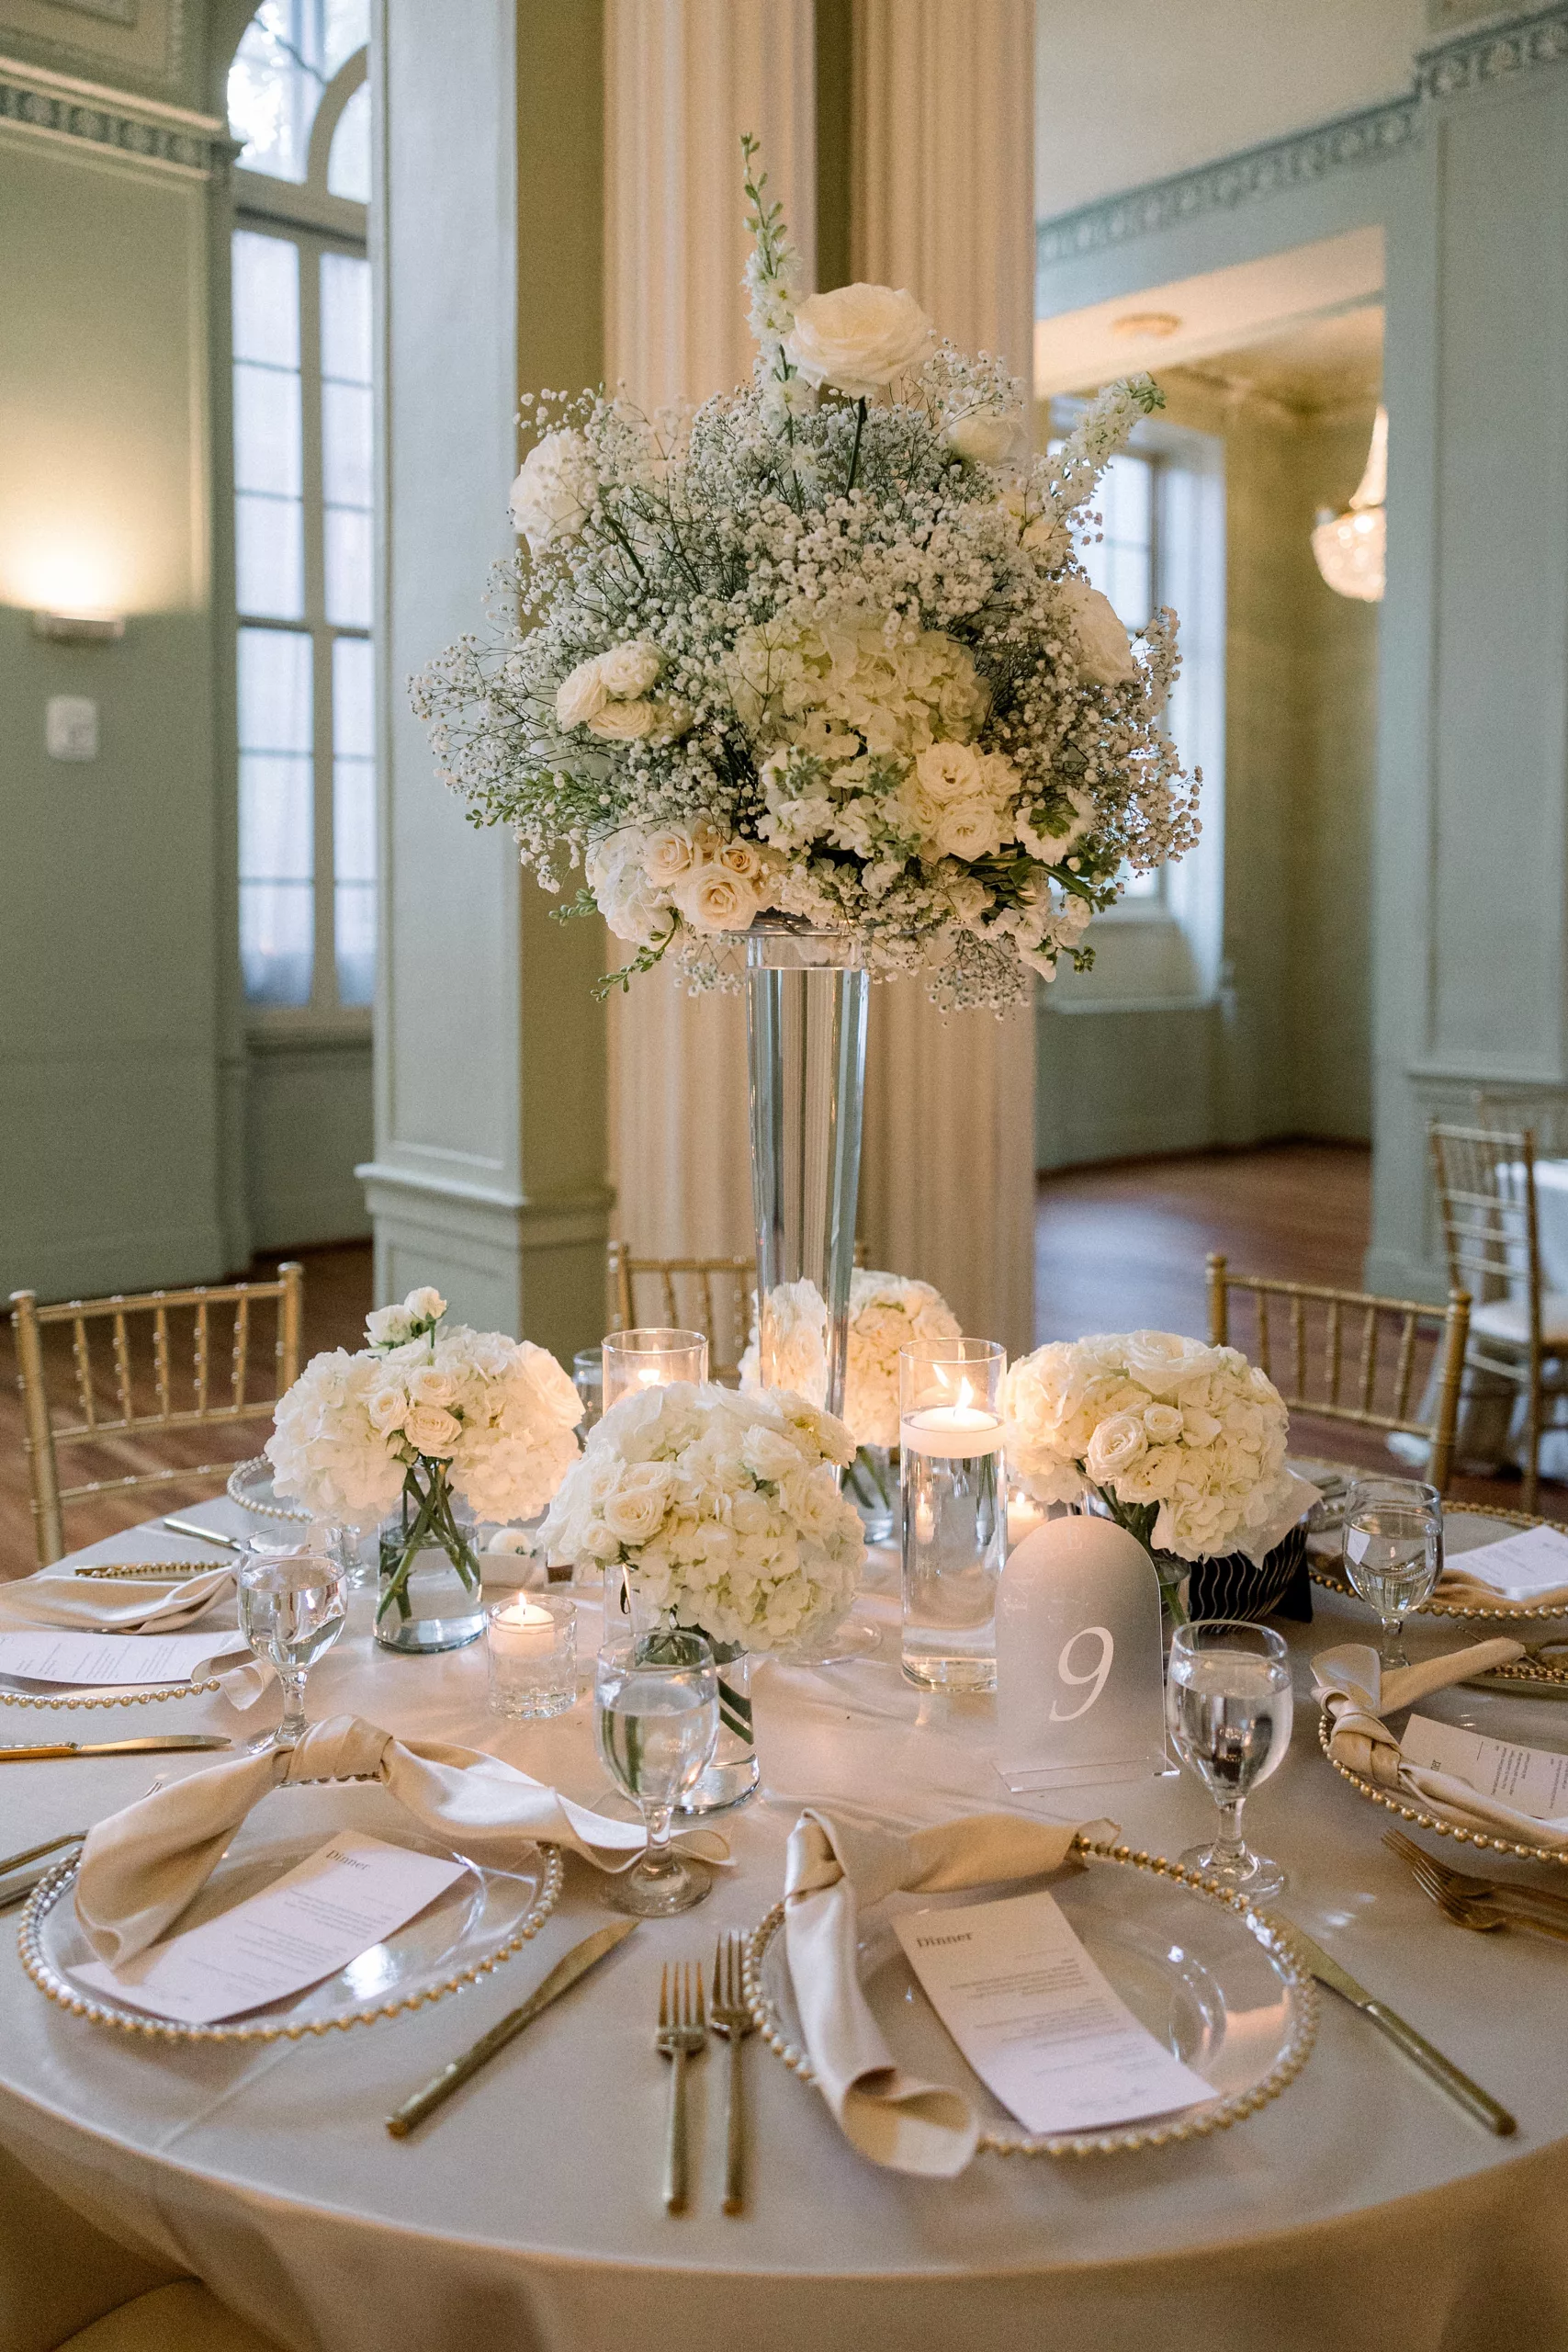 Details of a wedding reception table with large white flower centerpiece 